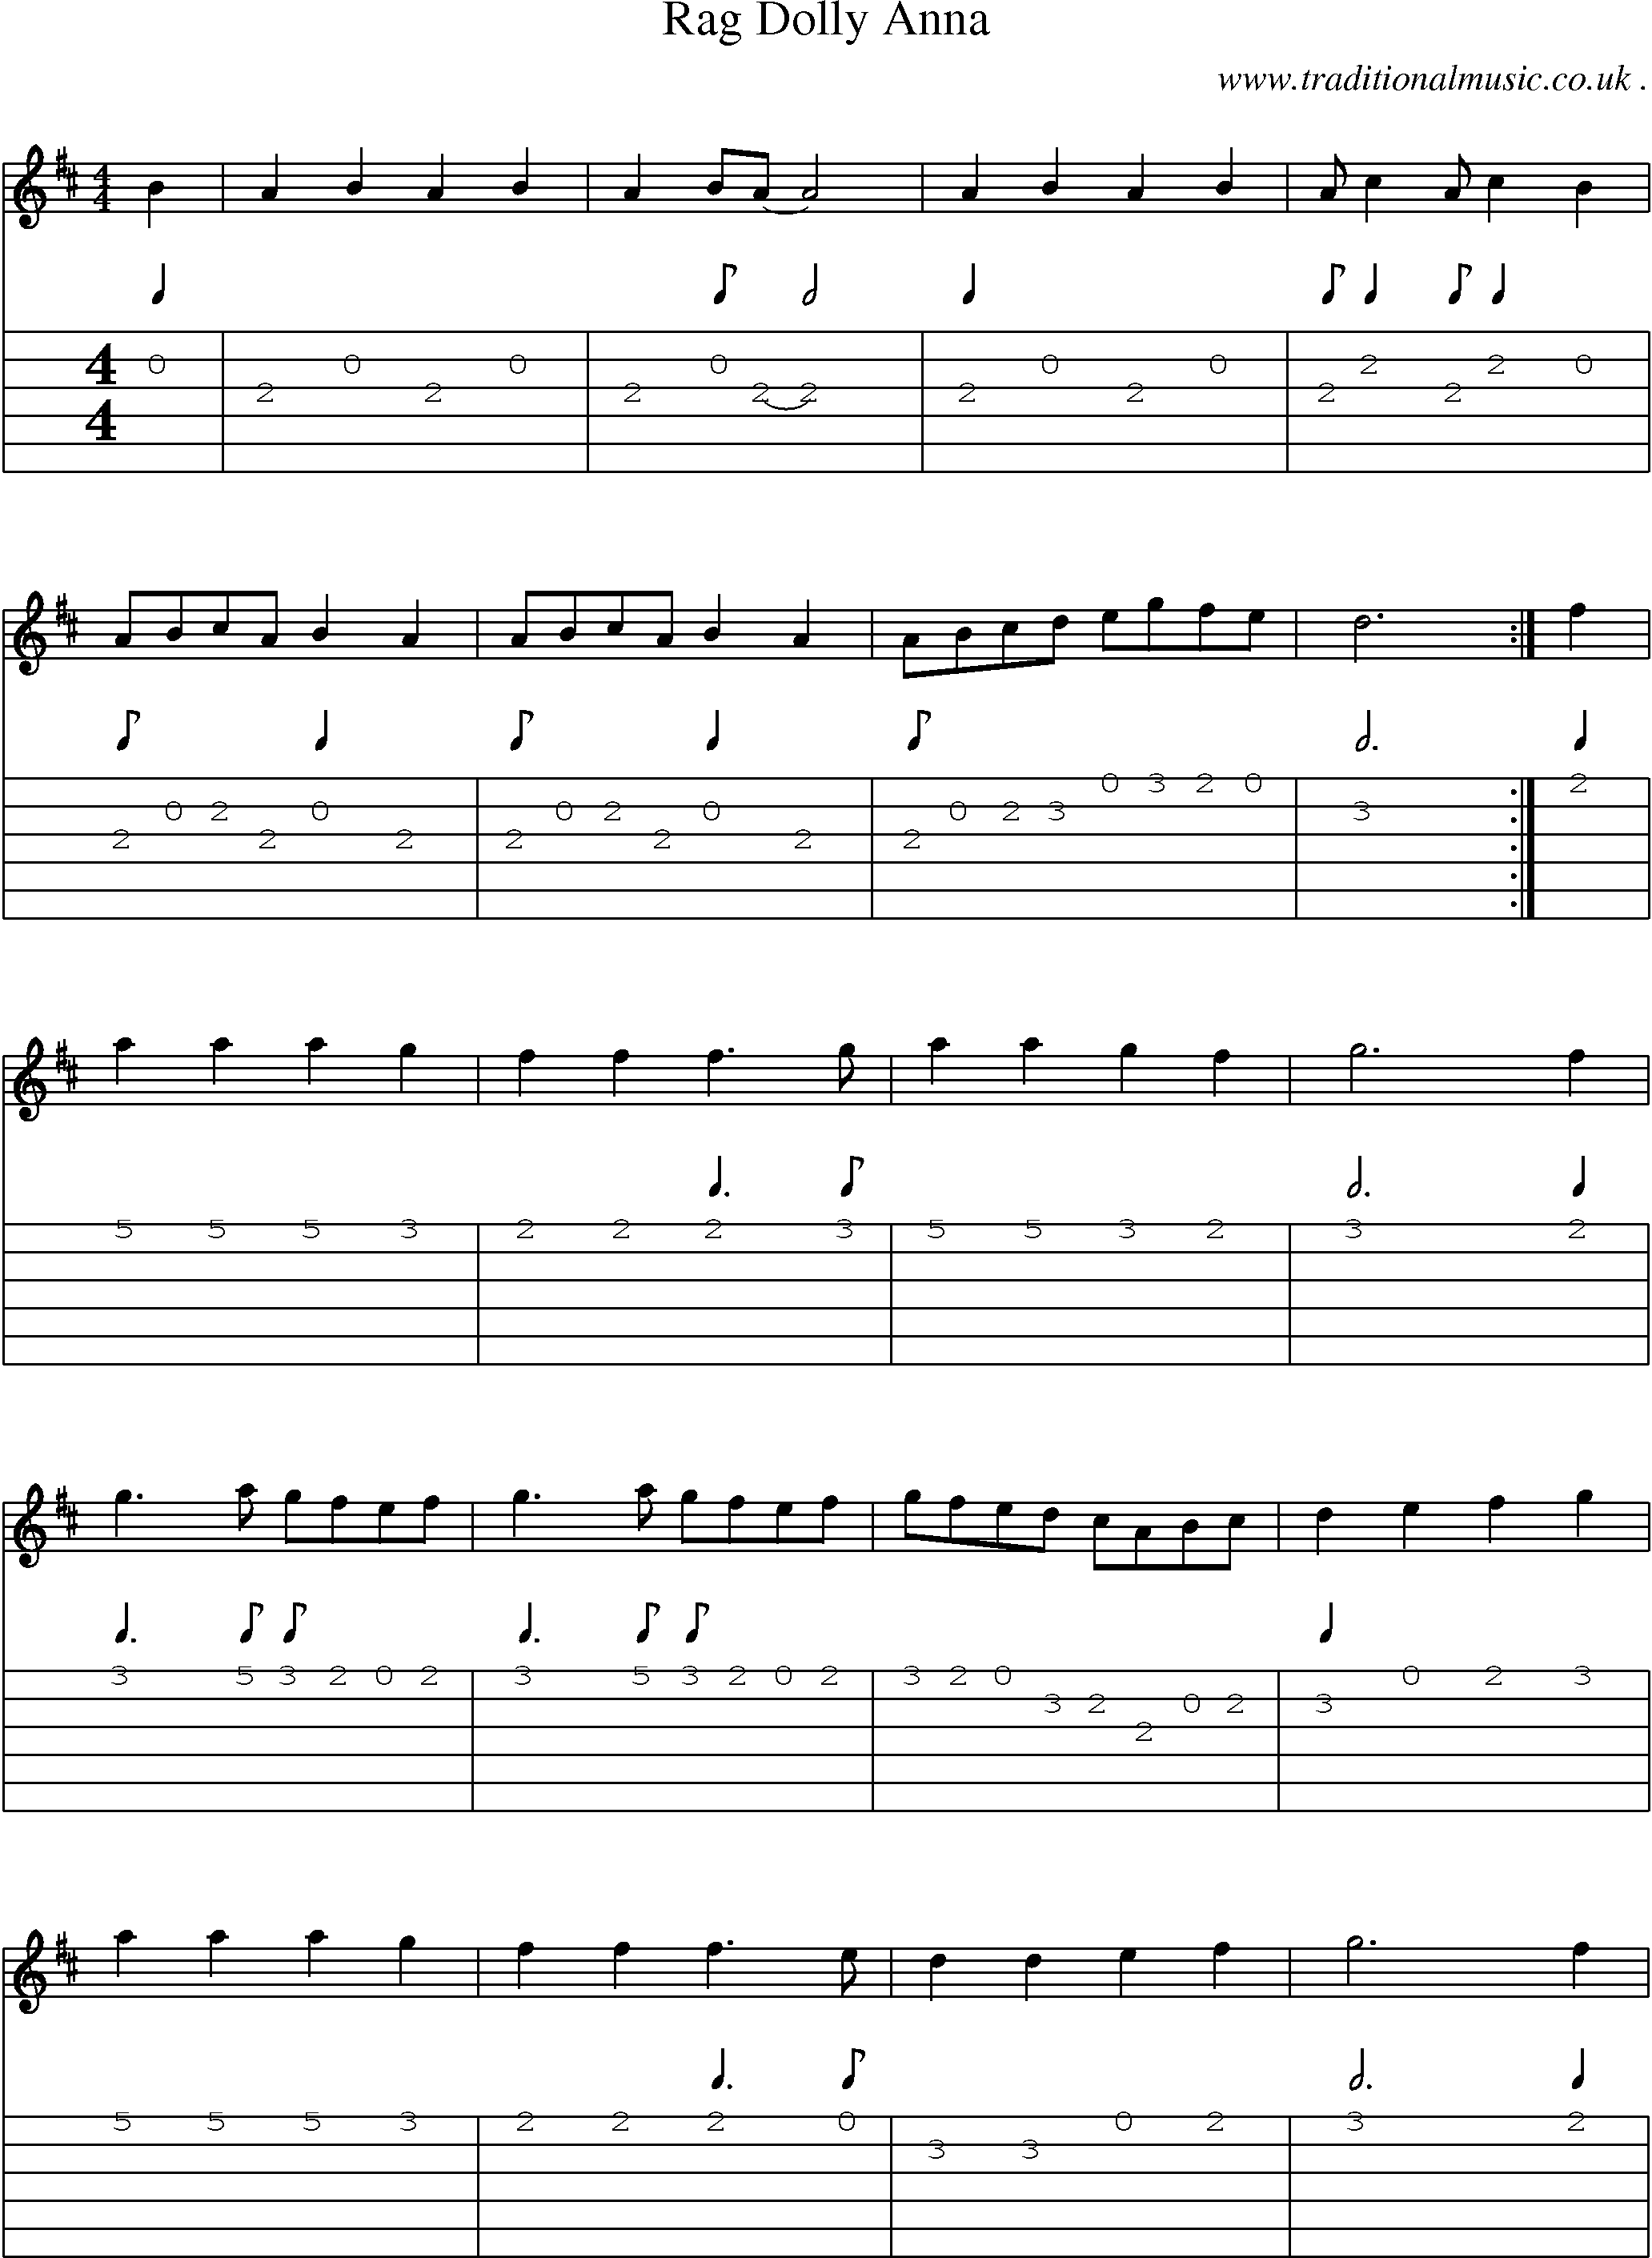 Sheet-Music and Guitar Tabs for Rag Dolly Anna